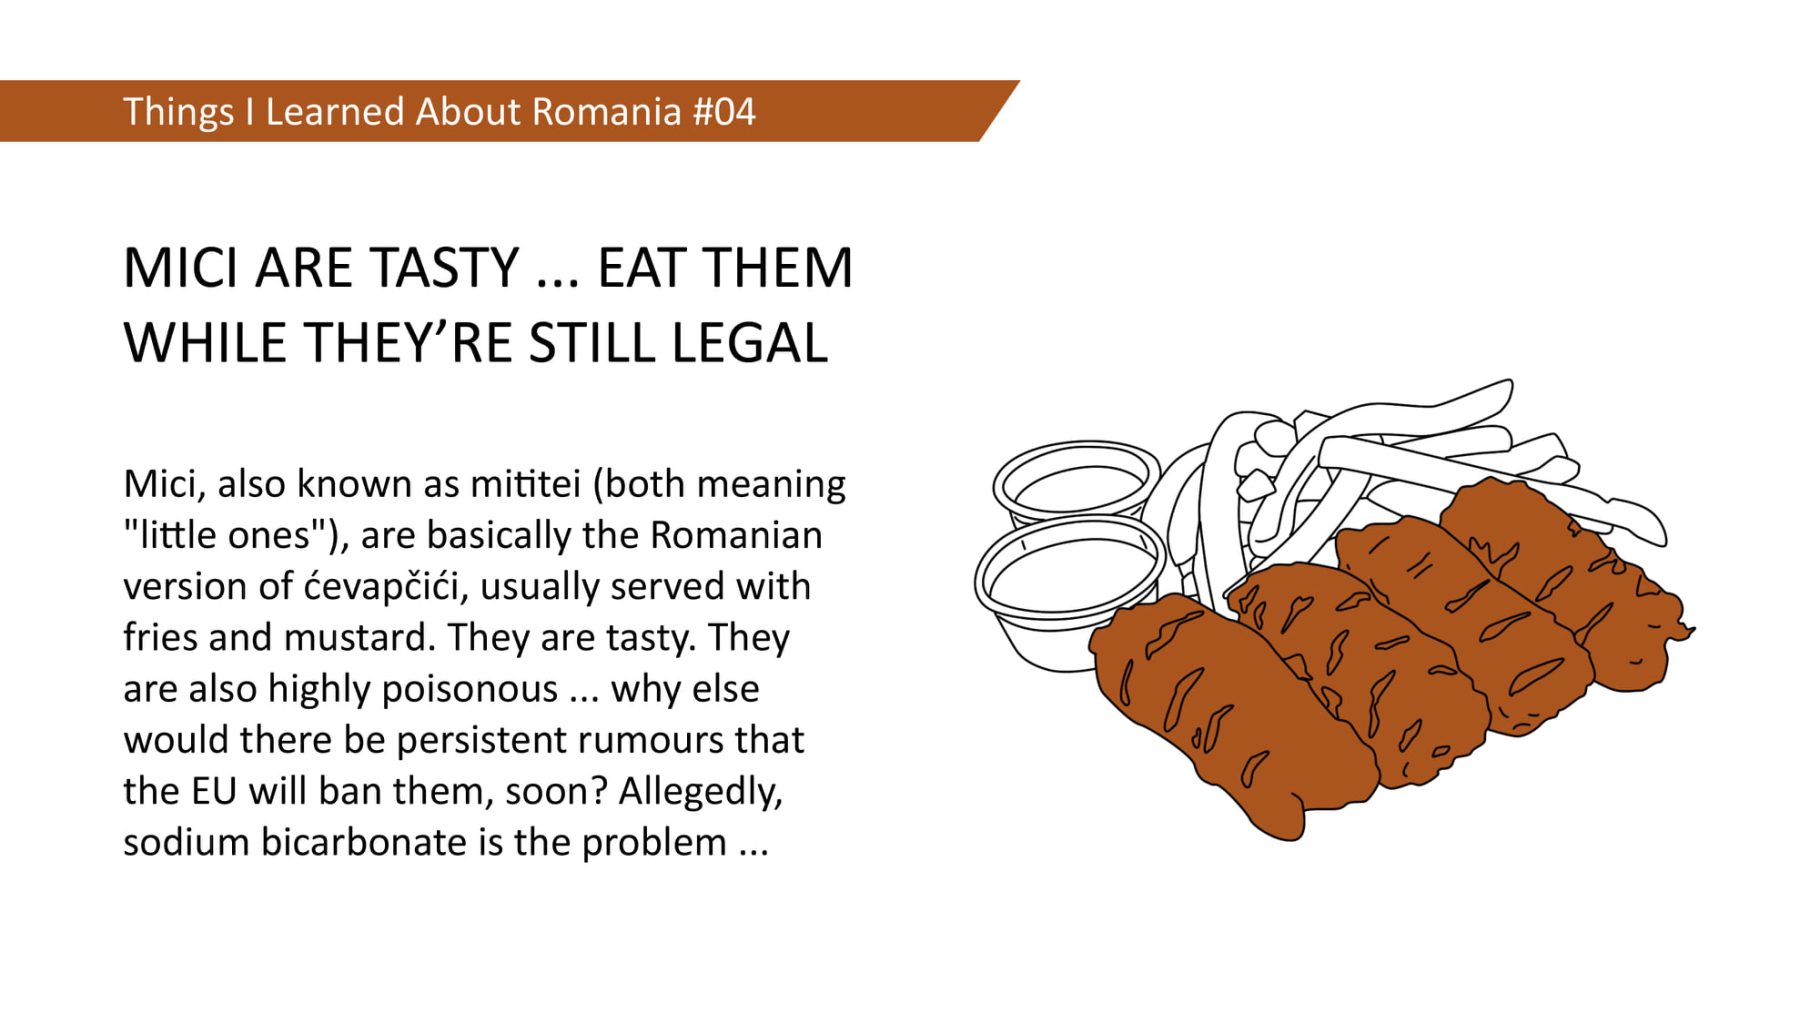 Mici, also known as mititei (both meaning "little ones"), are basically the Romanian version of cevapcici, usually served with fries and mustard. They are tasty. They are also highly poisonous ... why else would there be persistent rumours that the EU will ban them, soon? Allegedly, sodium bicarbonate is the problem ...